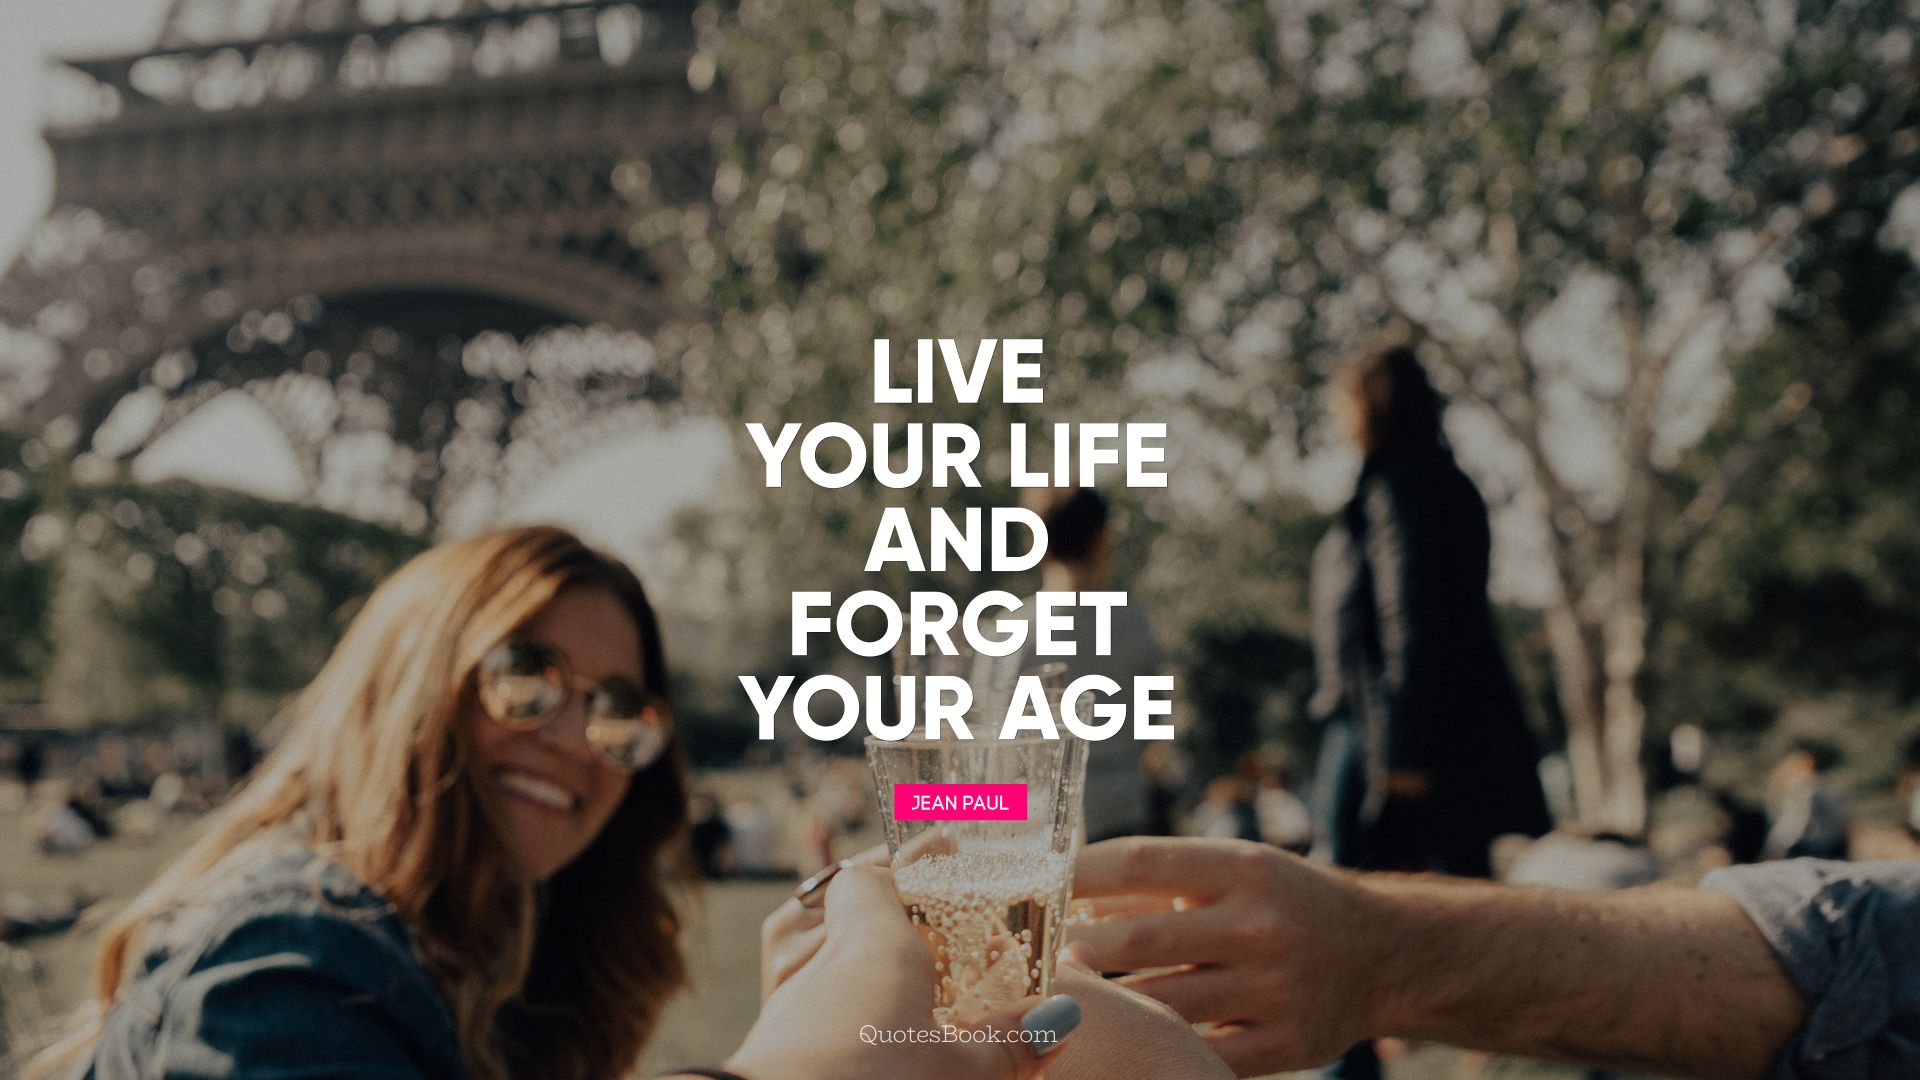 Live your life and forget your age. - Quote by Jean Paul